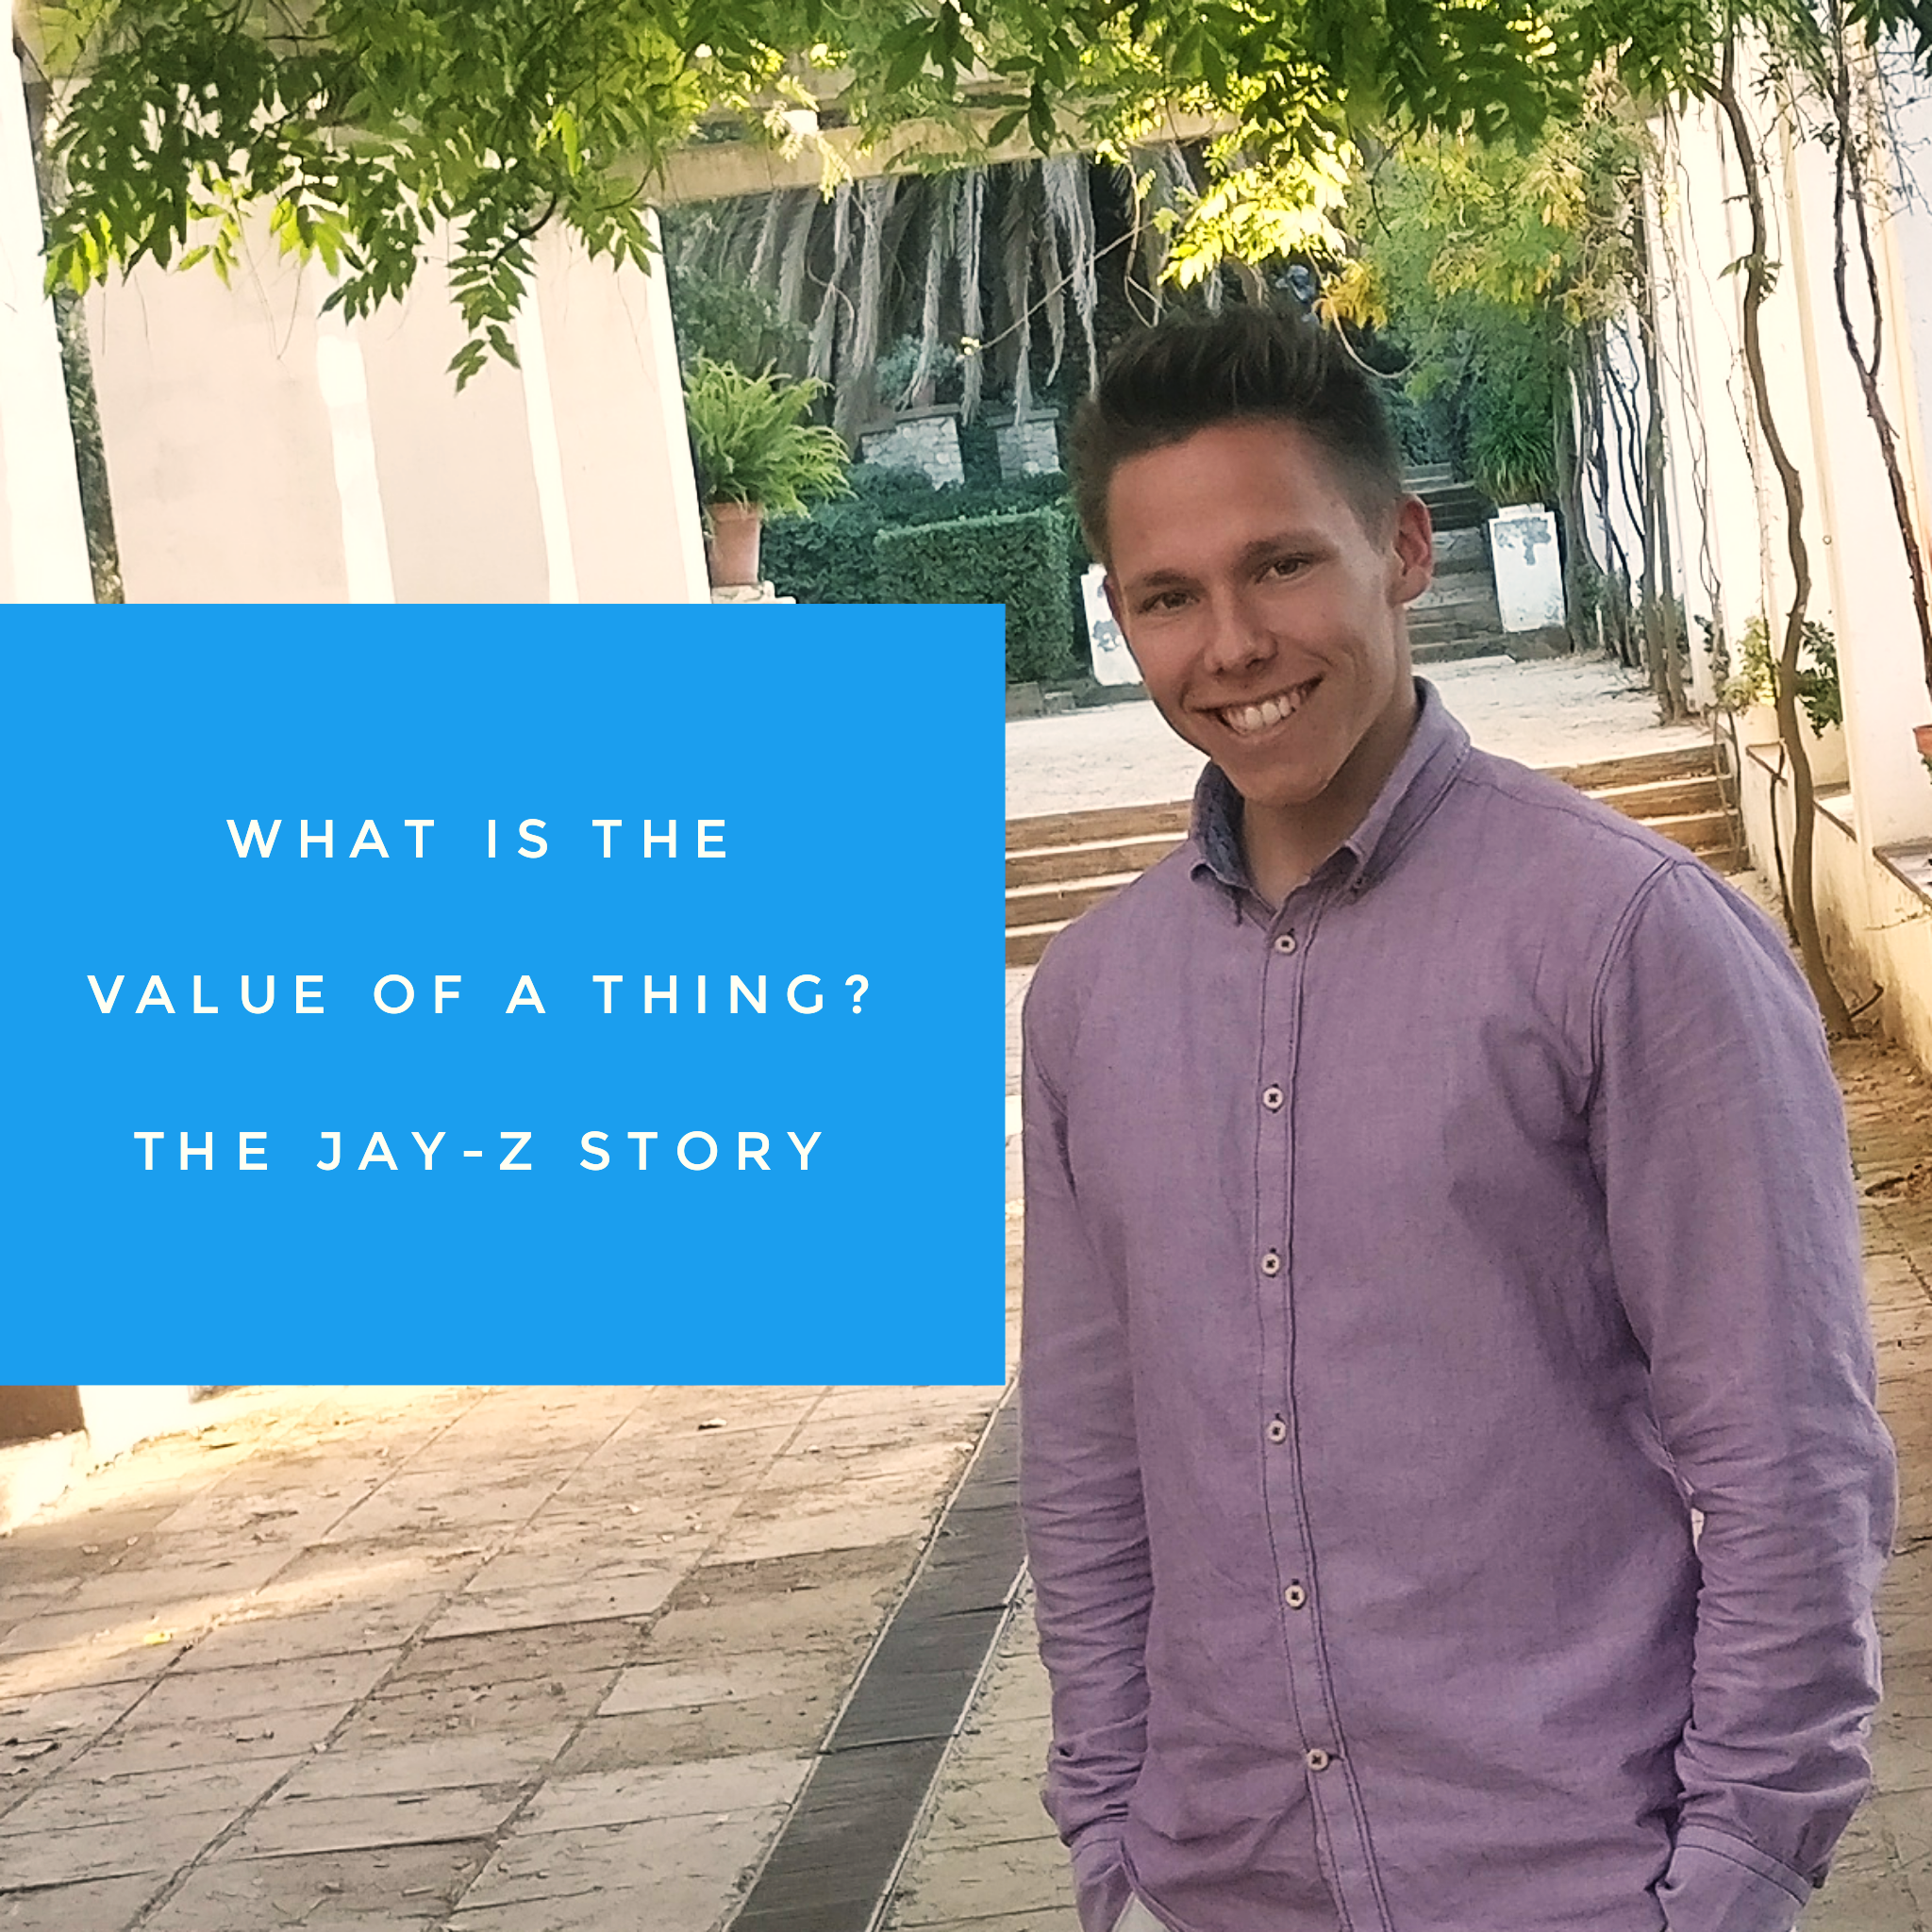 What is the value of a thing? The Jay-Z story